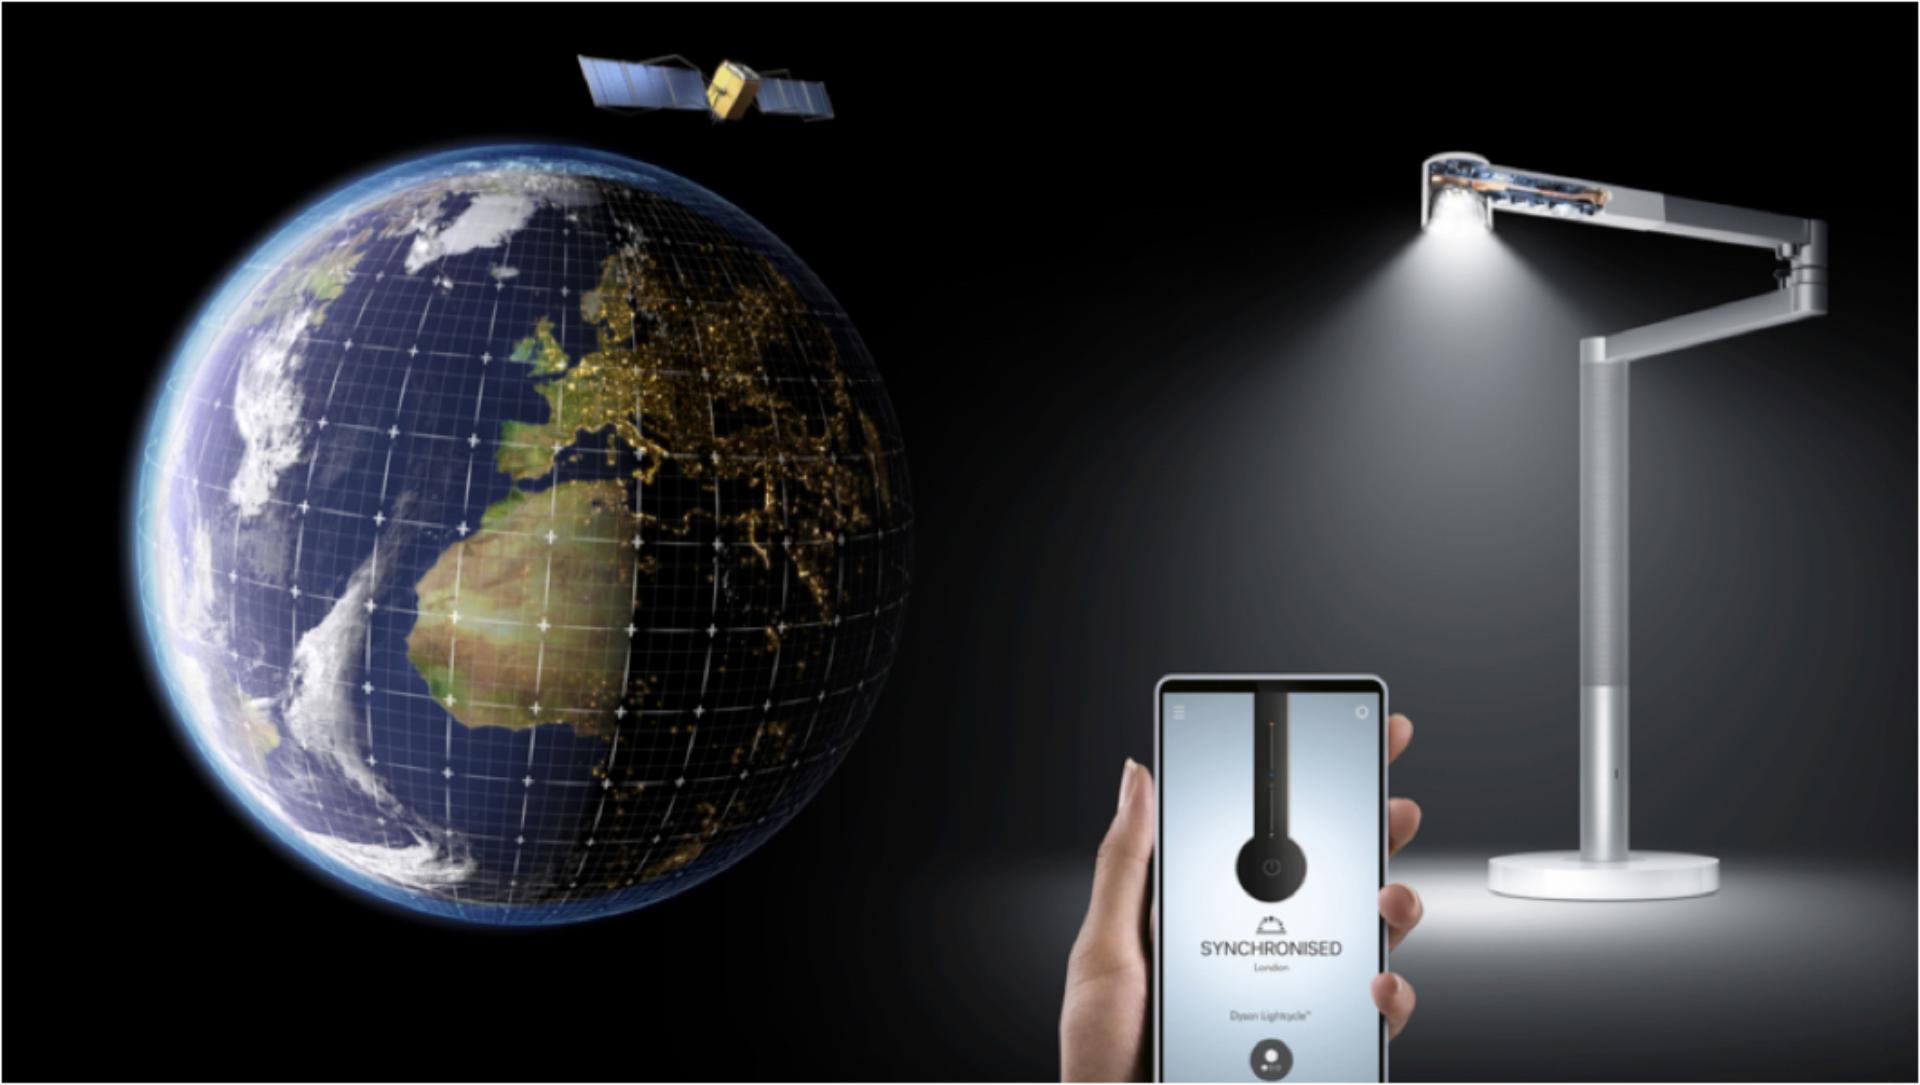 Global positioning used for the daylight tracking algorithm in the Dyson Link app